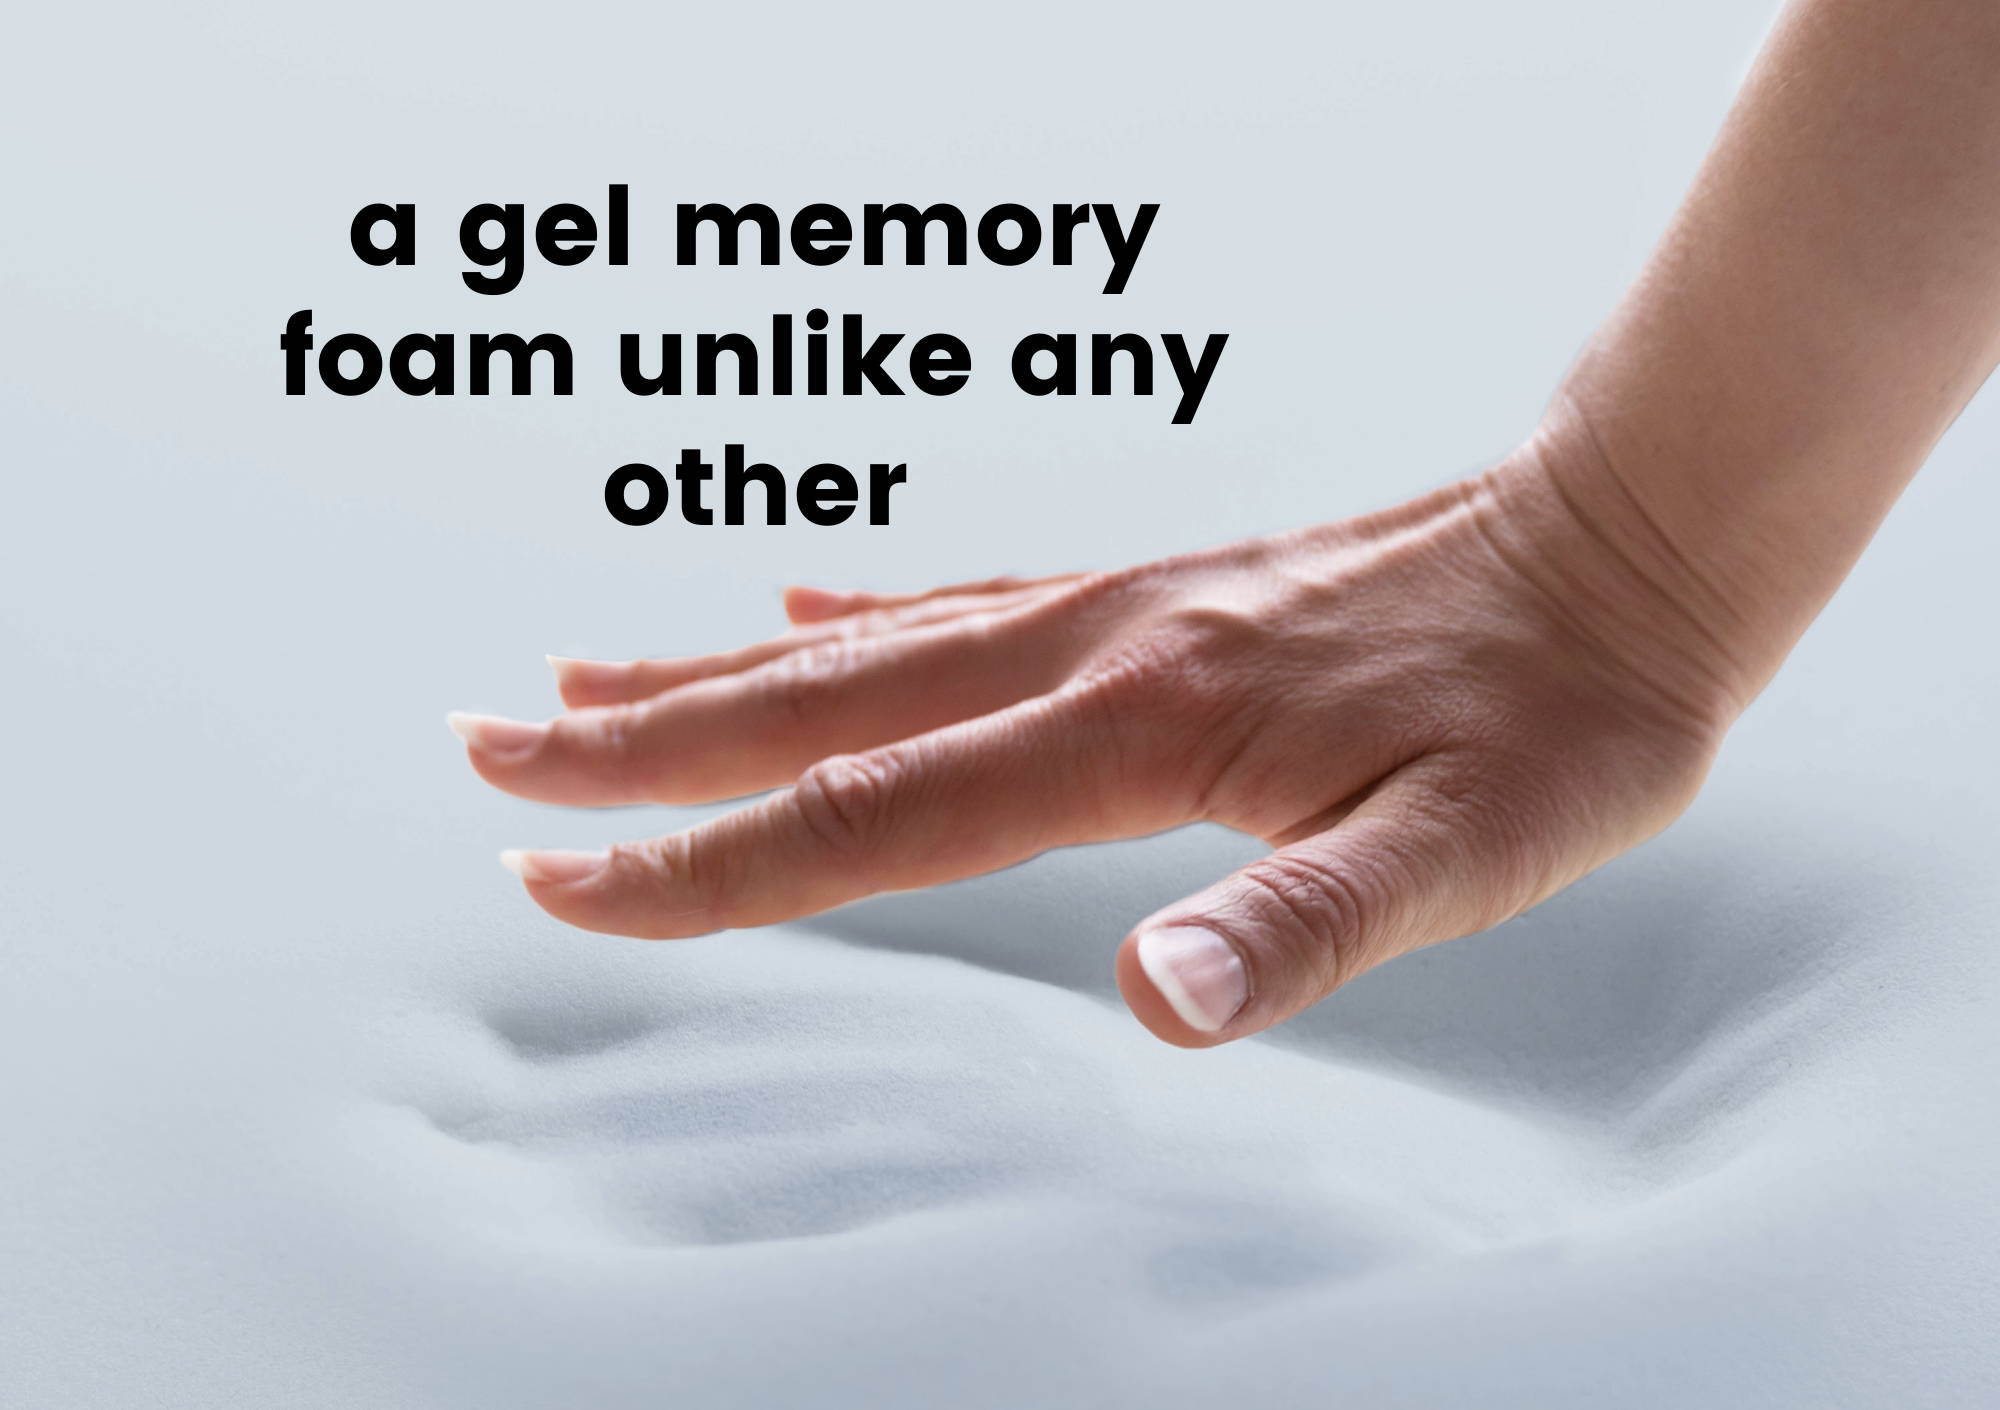 A hand press on the gel memory foam leaving a hand print behind showing a gel memory foam unlike any other.